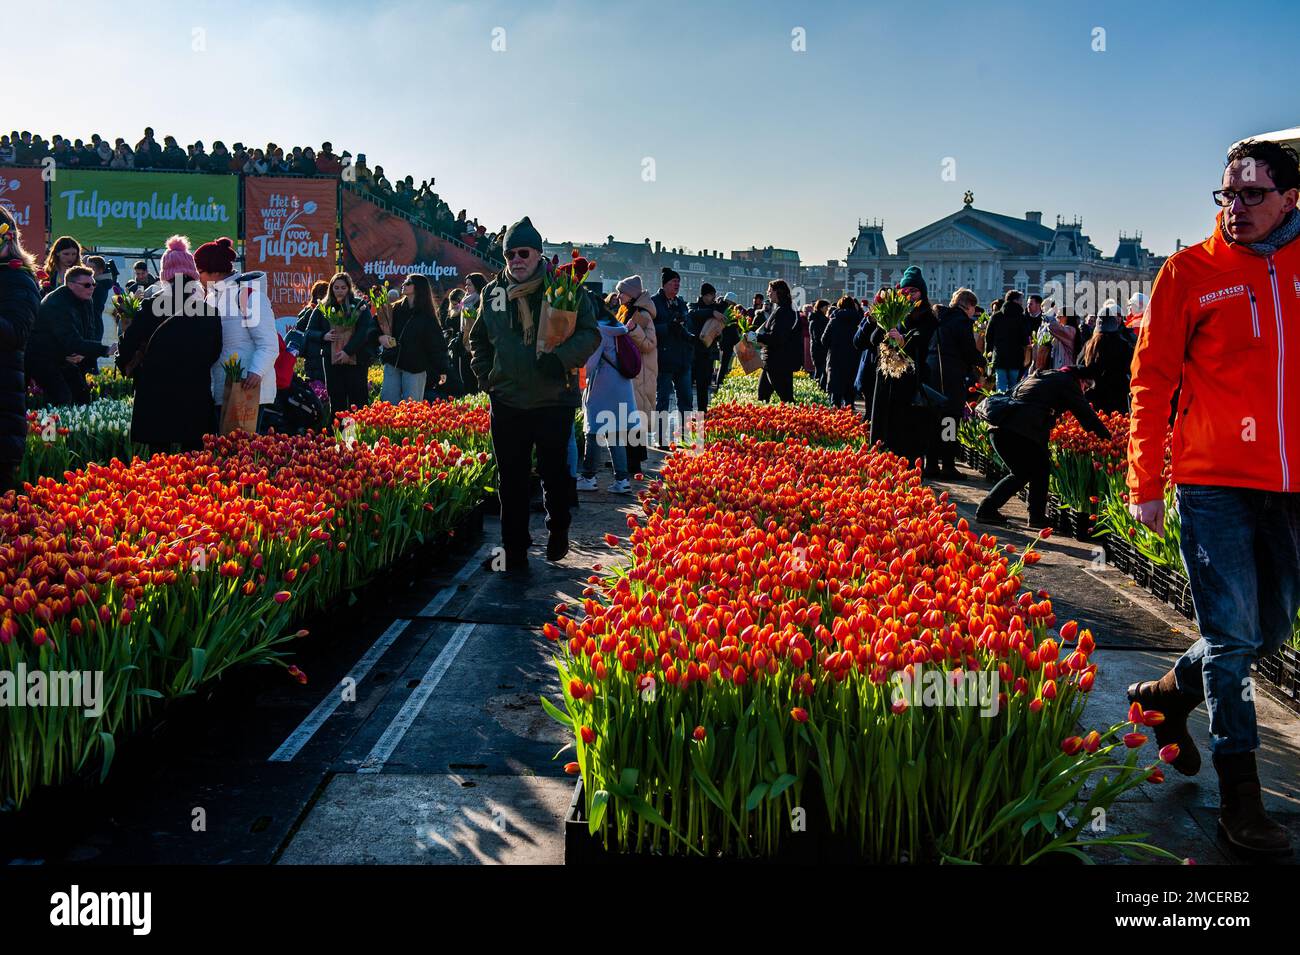 A man seen proudly walking with his bunch of tulips. Each year on the 3rd Saturday of January, the National Tulip Day is celebrated in Amsterdam. Dutch tulip growers built a huge picking garden with more than 200,000 colorful tulips at the Museumplein in Amsterdam. Visitors are allowed to pick tulips for free. The event was opened by Olympic skating champion, Irene Schouten. Prior to the opening, she christened a new tulip: Tulipa 'Dutch Pearl' as a reference to the world - famous painting 'The girl with a pearl earring' by Johannes Vermeer. Stock Photo